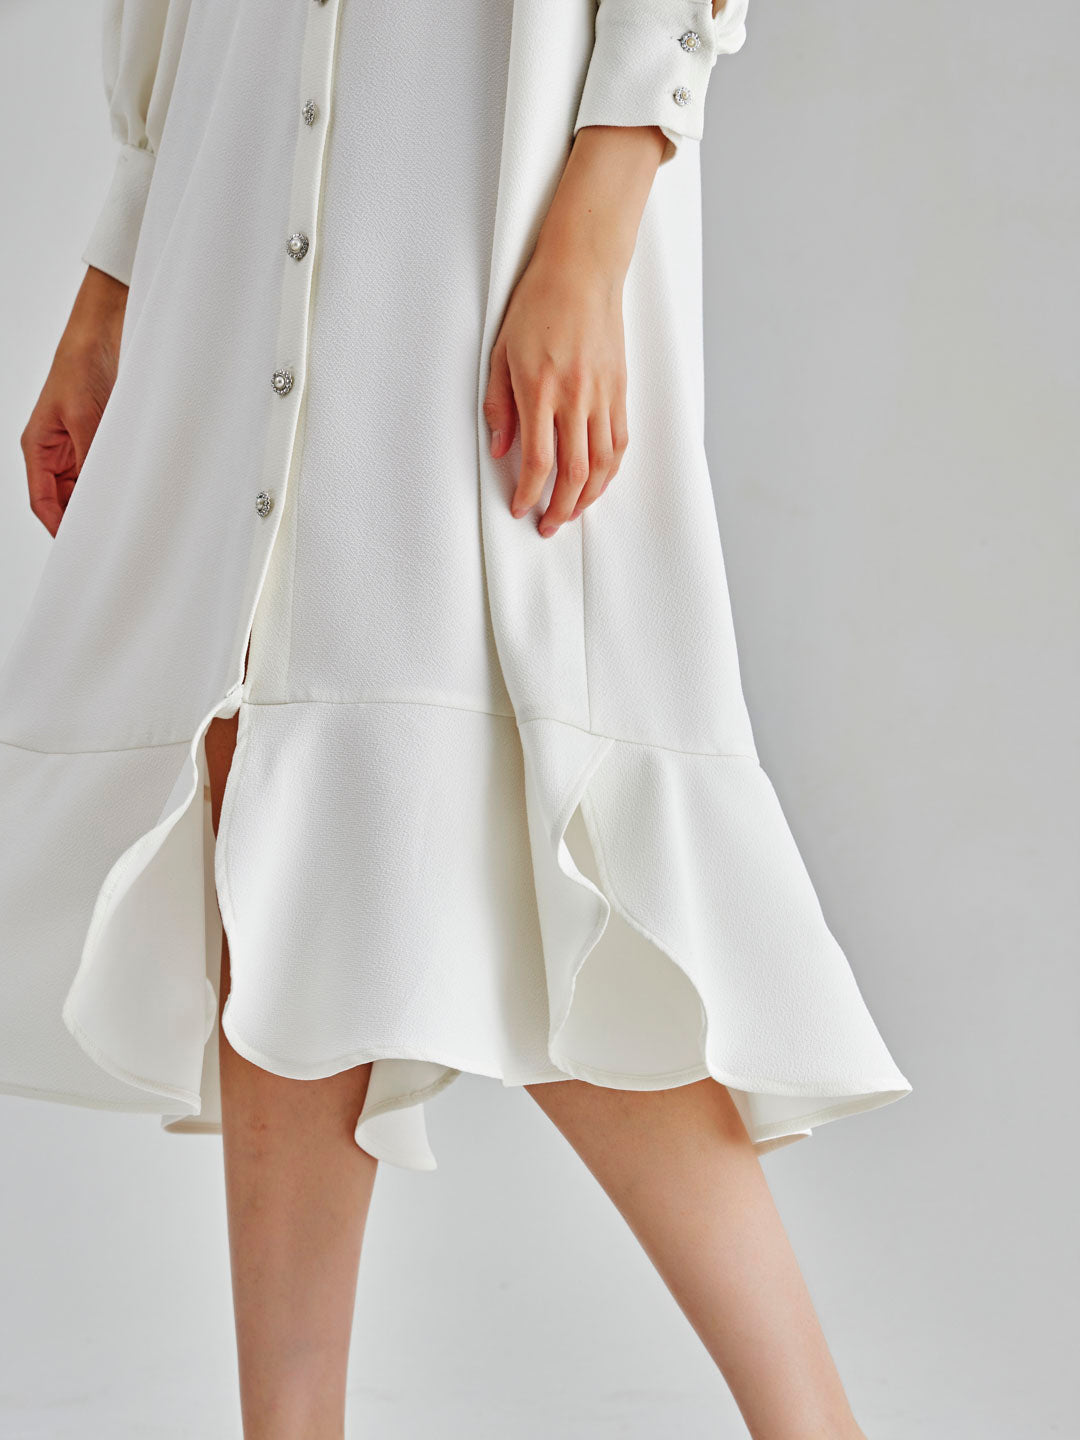 Isola Pearl Buttoned Dress White